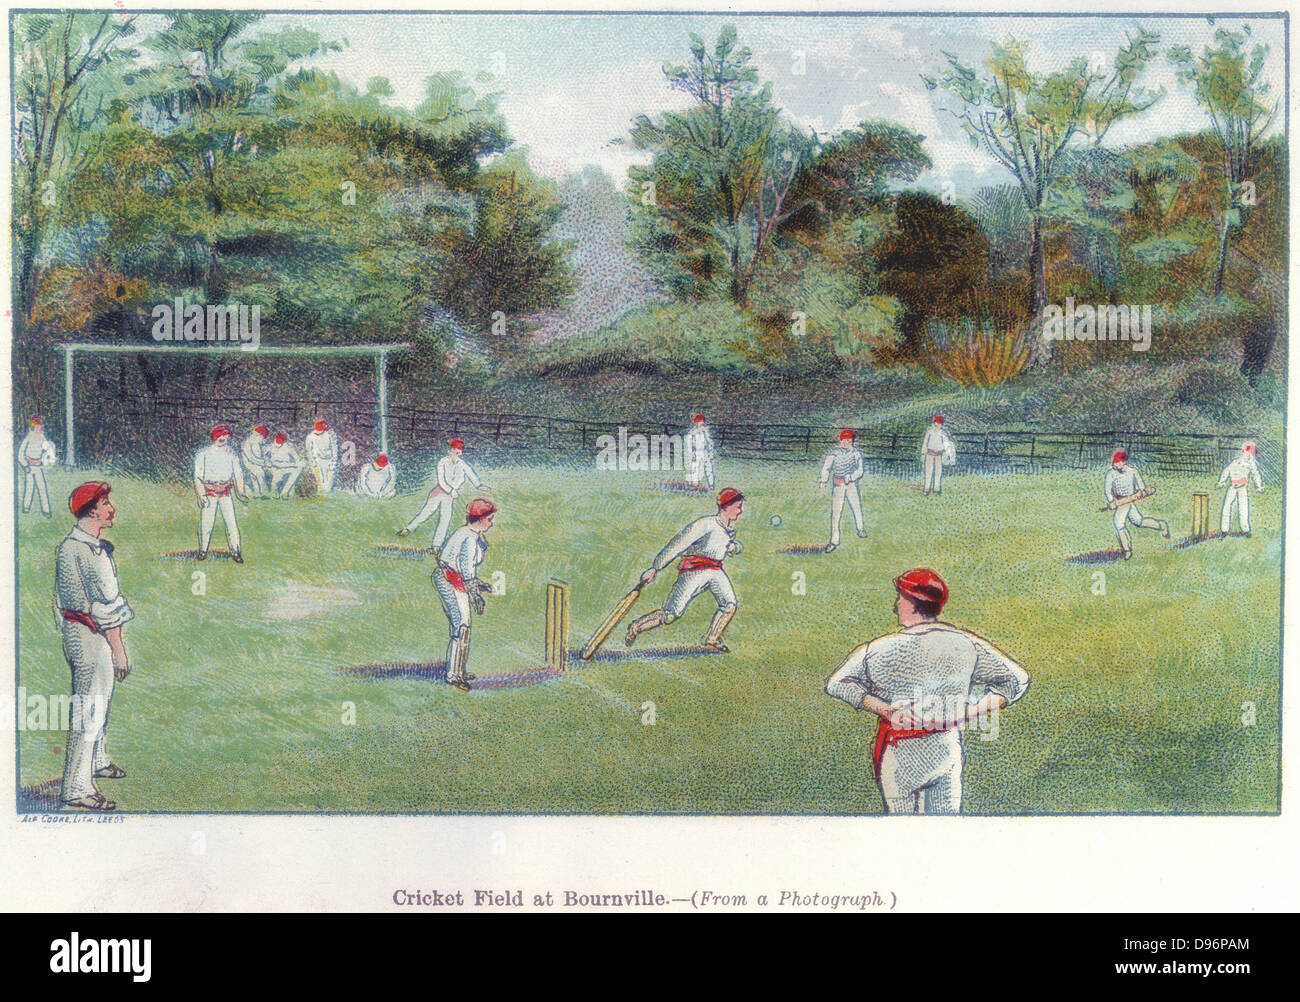 Cricket Field at Bournville', 1892. Bournville was the ideal village built near Birmingham for their employees by the chocolate manufacturers Cadburys, founded by the Quaker businessman John Cadbury (1801-1889). From 'Cocoa: All About it'. (London, 1892) Stock Photo